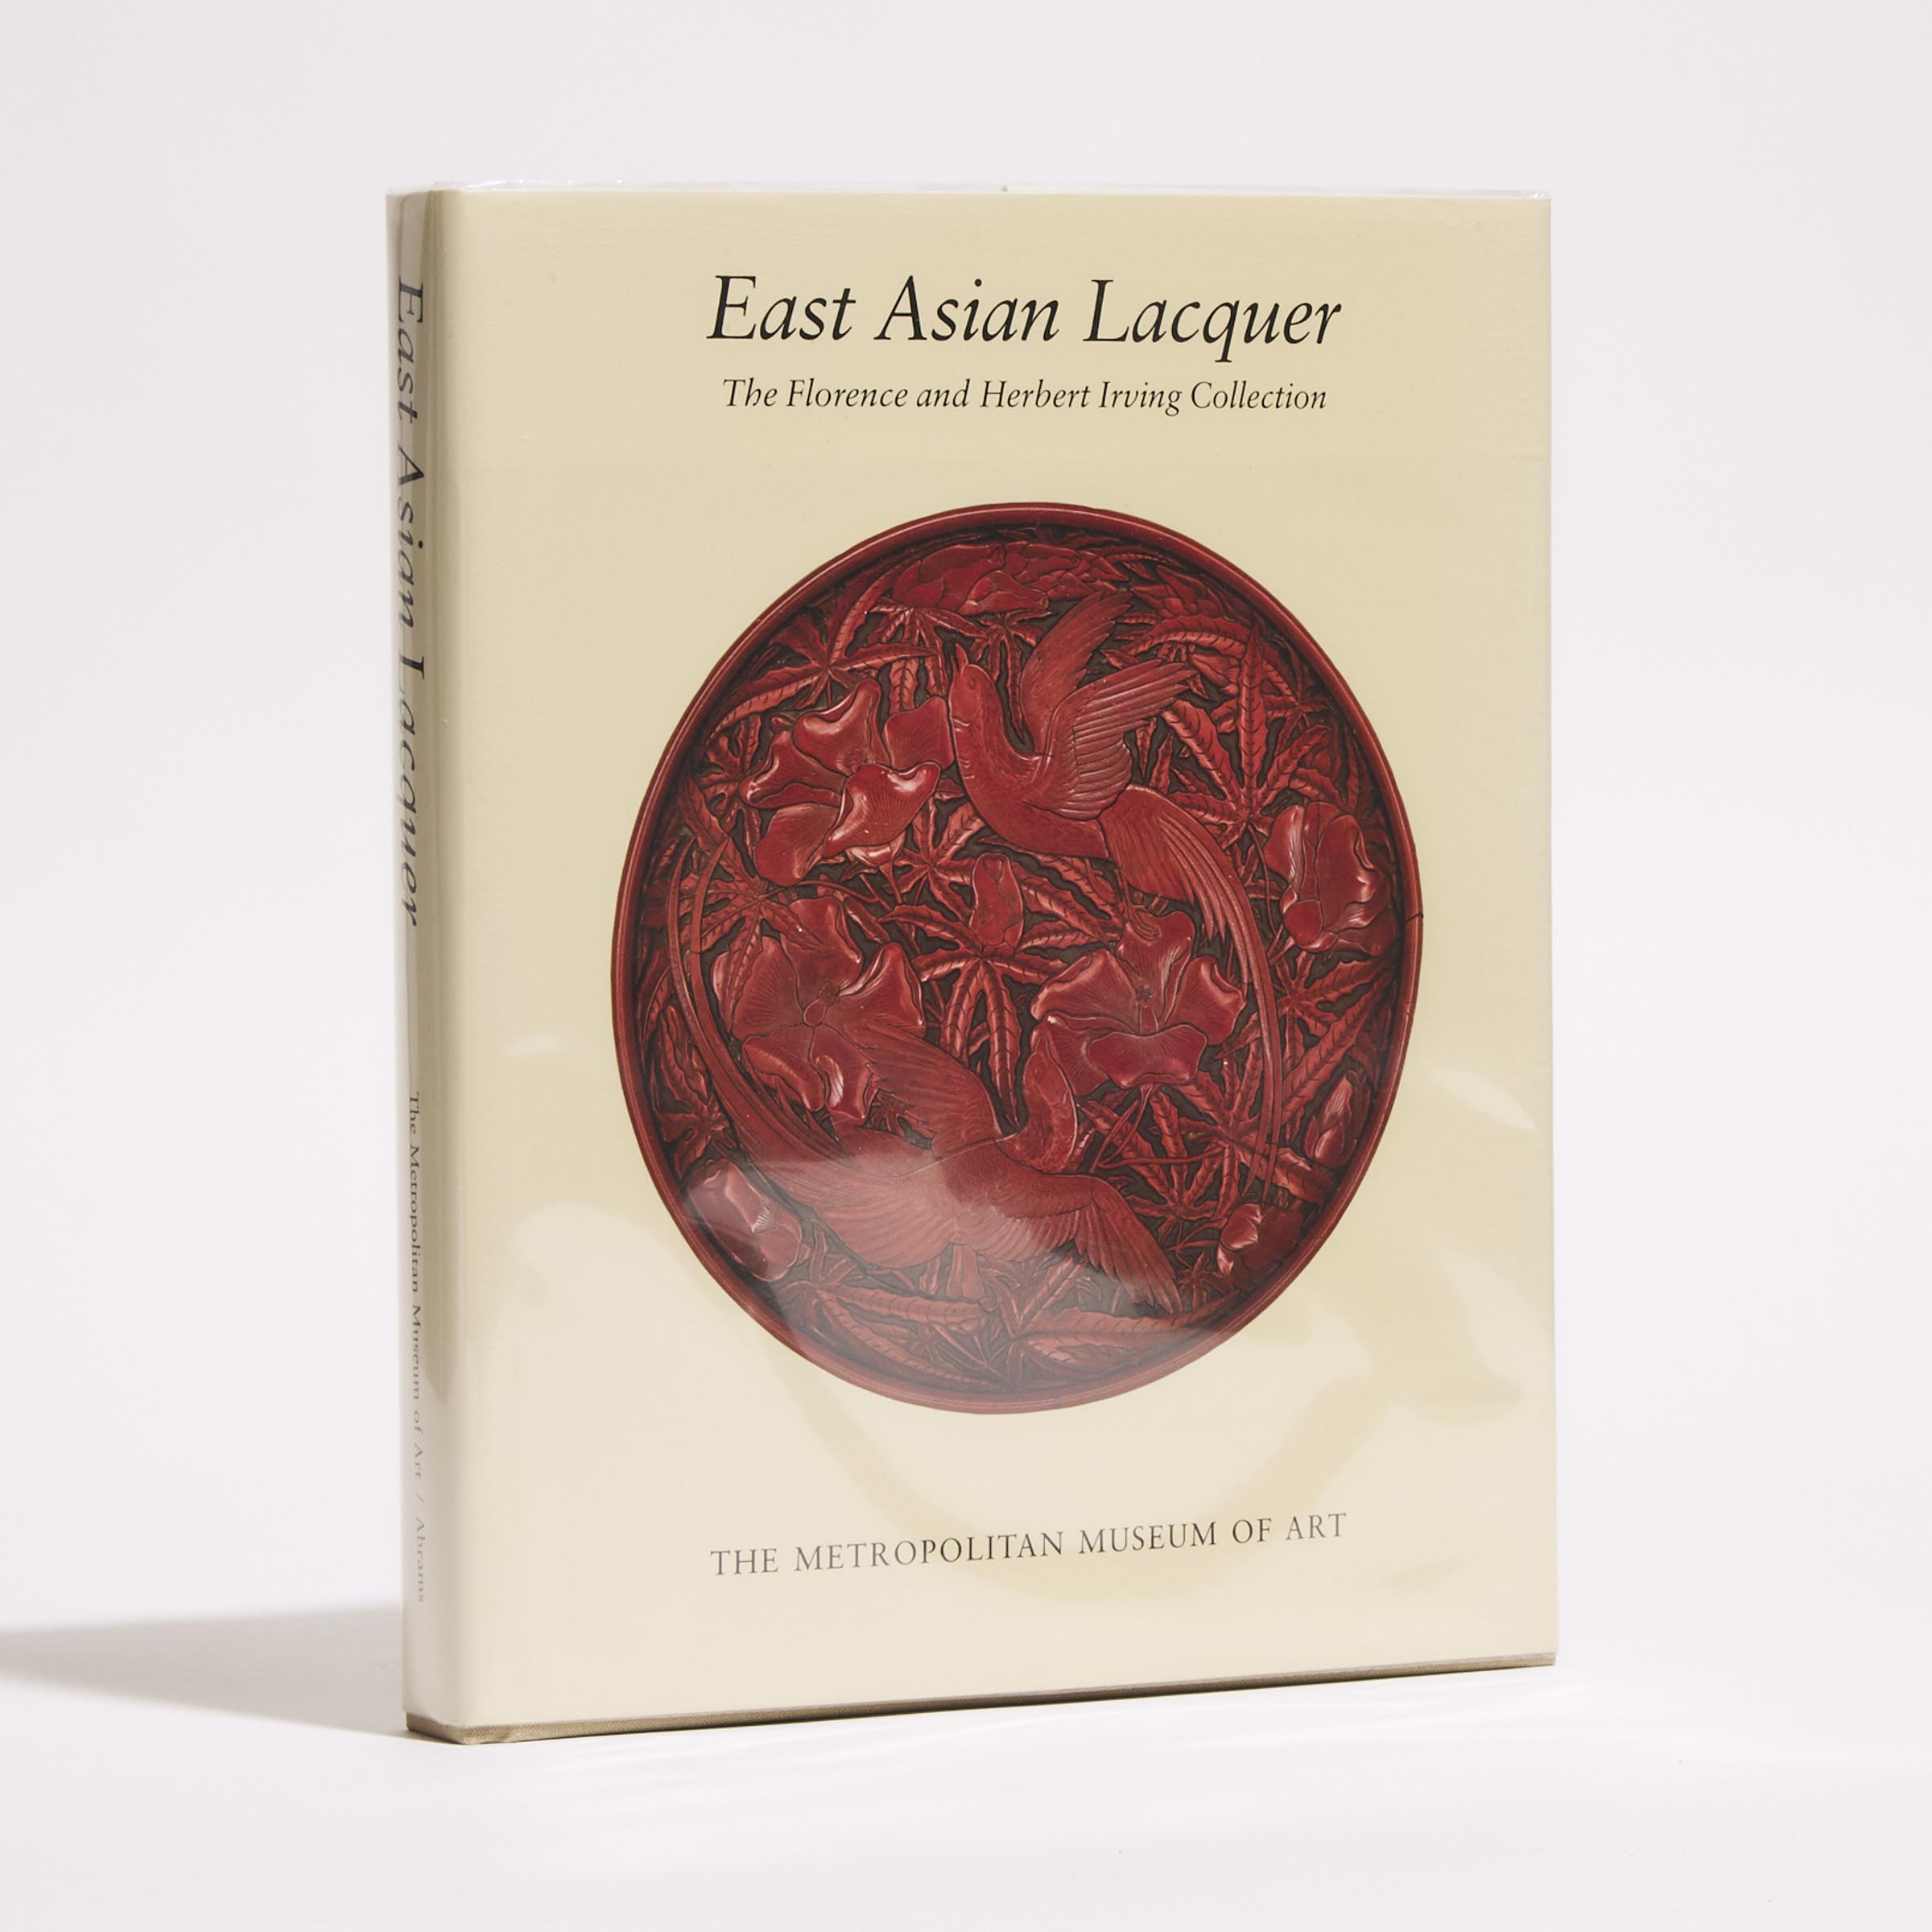 James C.Y. Watt and Barbara Brennan Ford, East Asian Lacquer: The Florence and Herbert Irving Collection, The Metropolitan Museum of Art, 1991